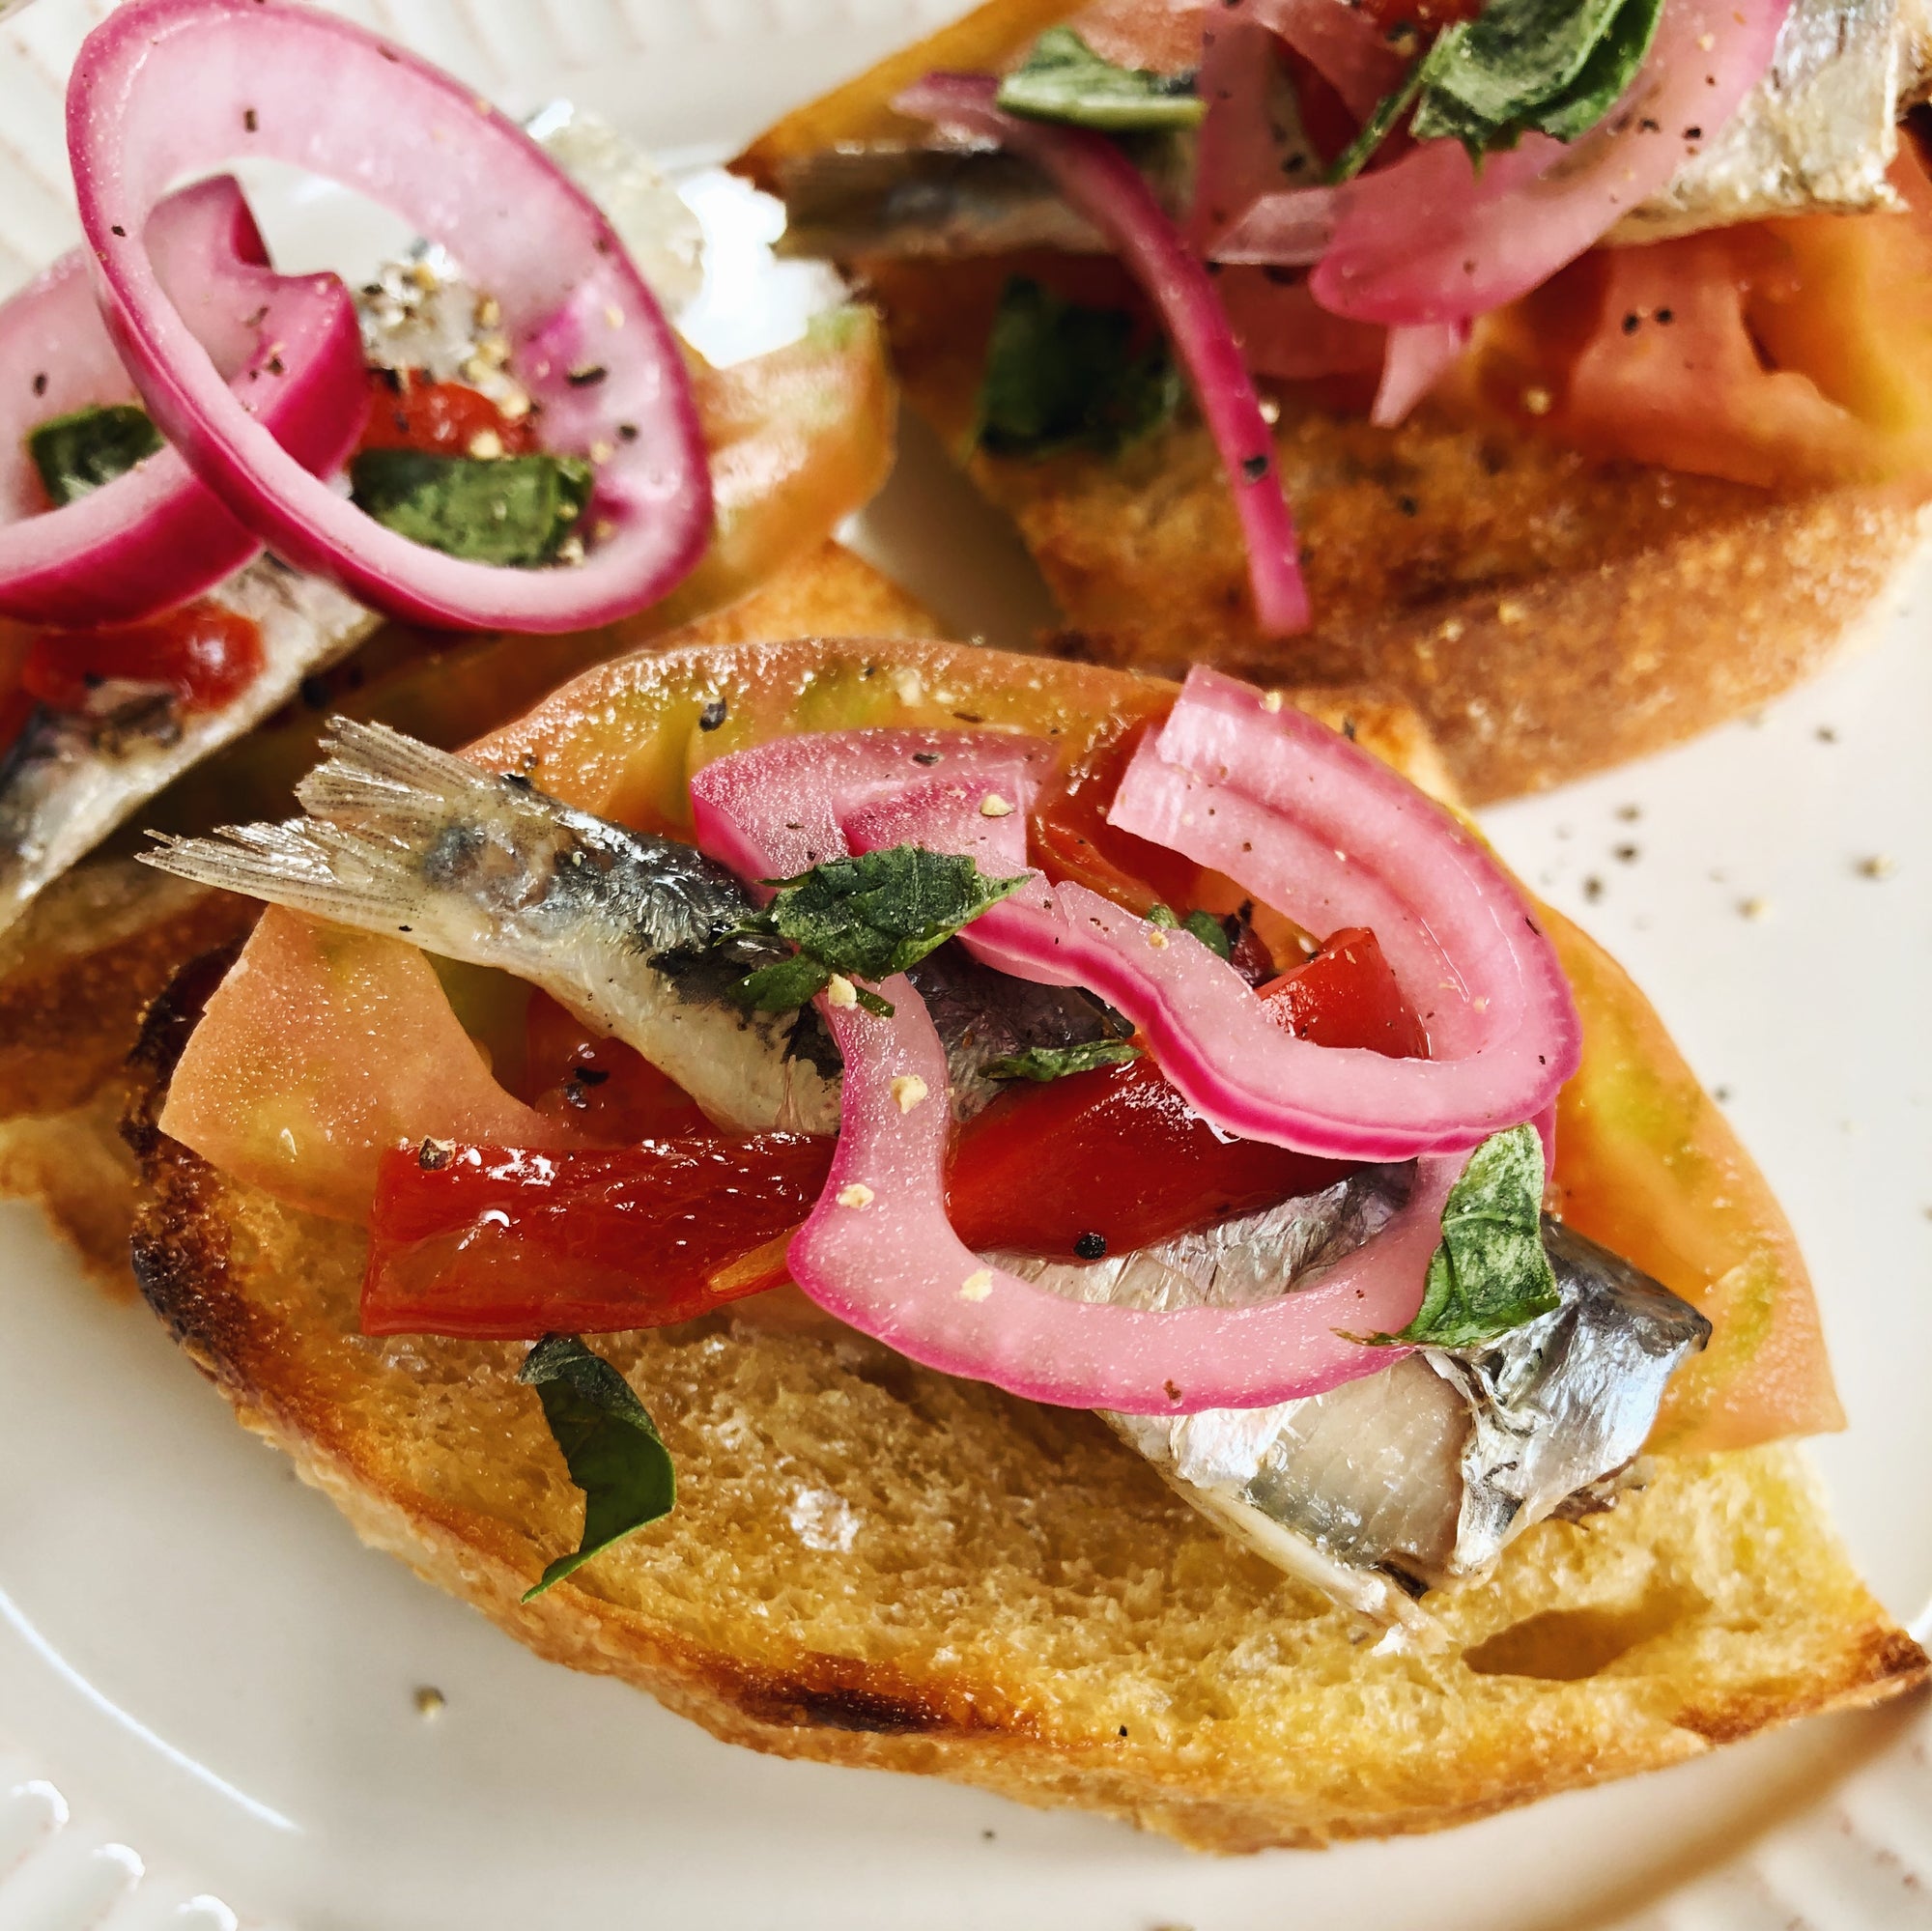 Sardinillas with piquillo pepper and pickled onions on garlic toast